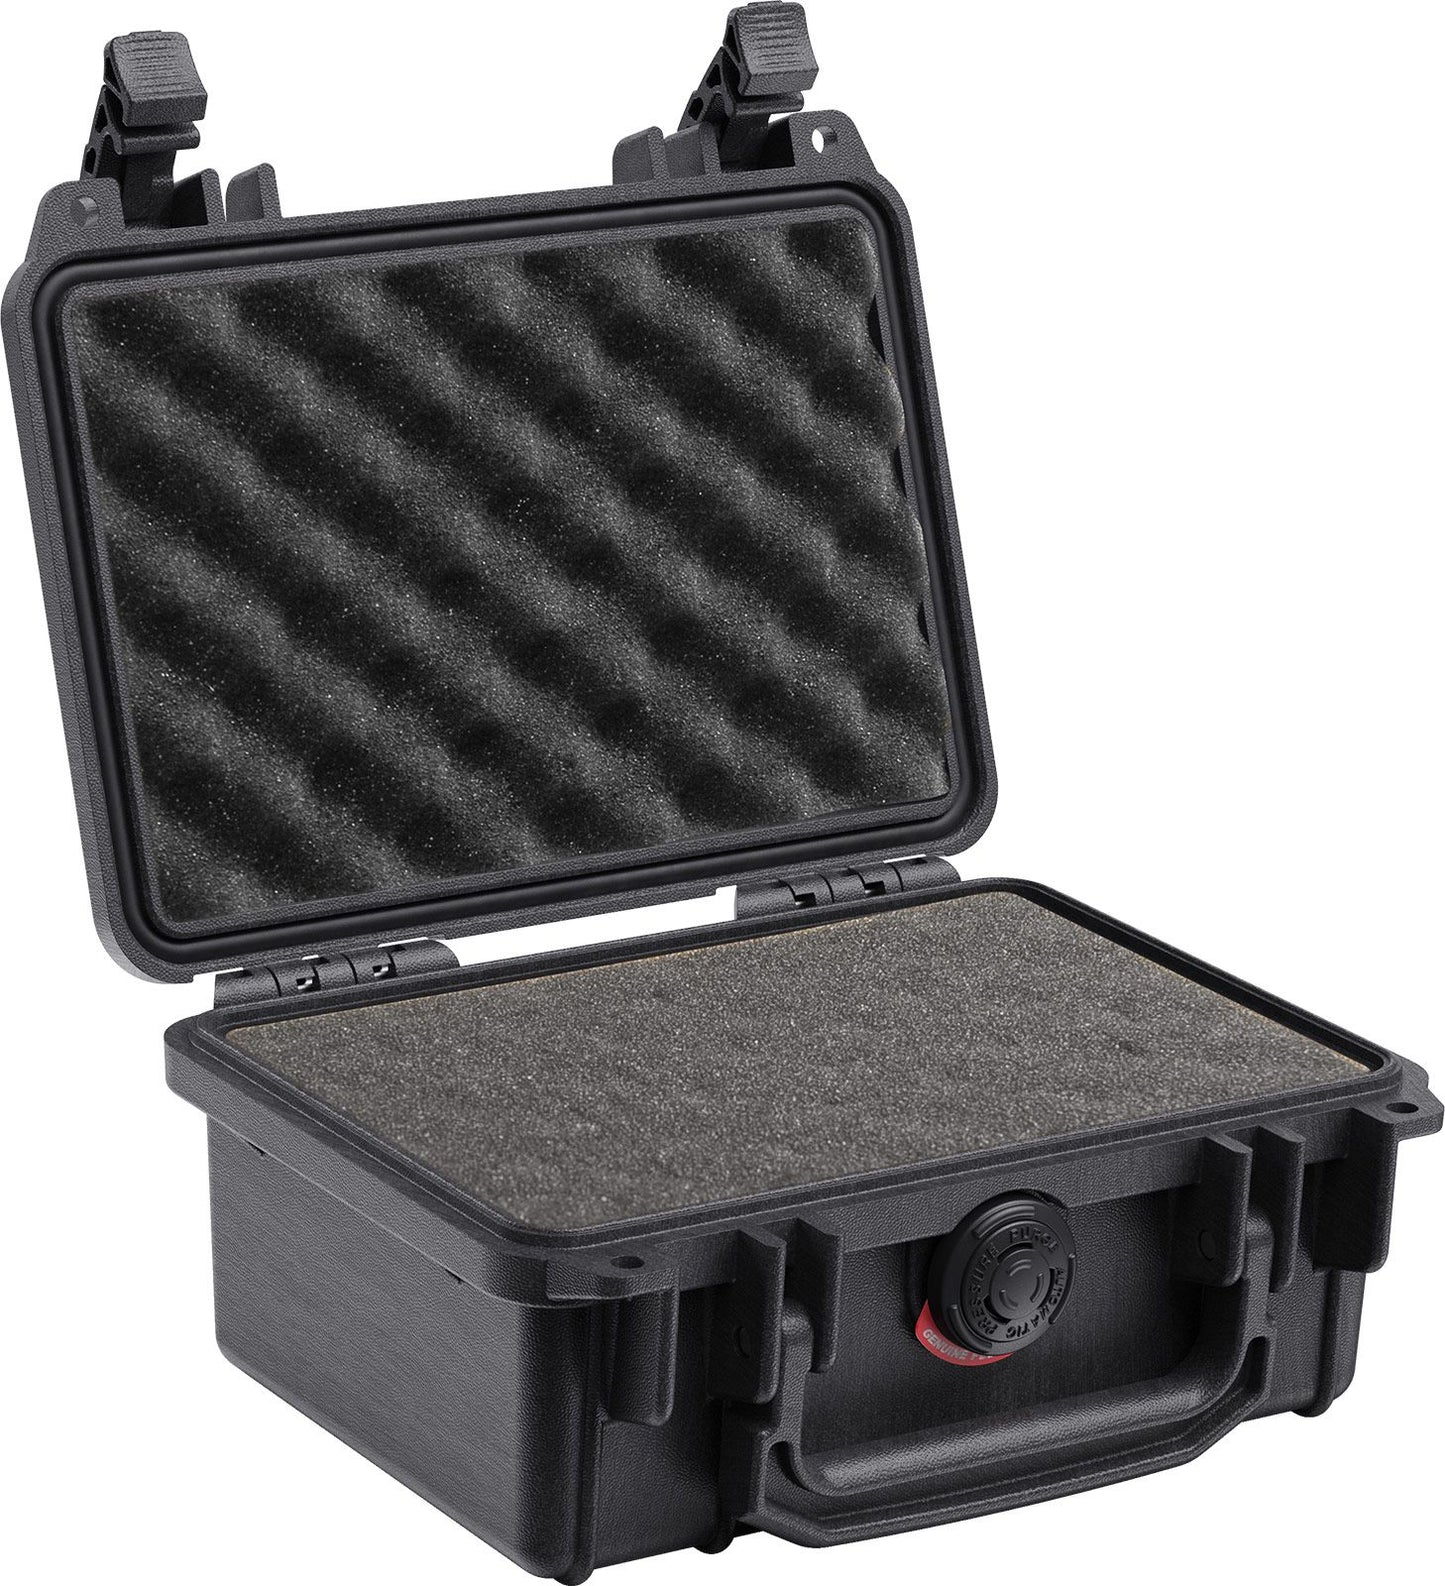 Pelican 1120 Black Protector Case with Foam-Limited Lifetime Local Warranty